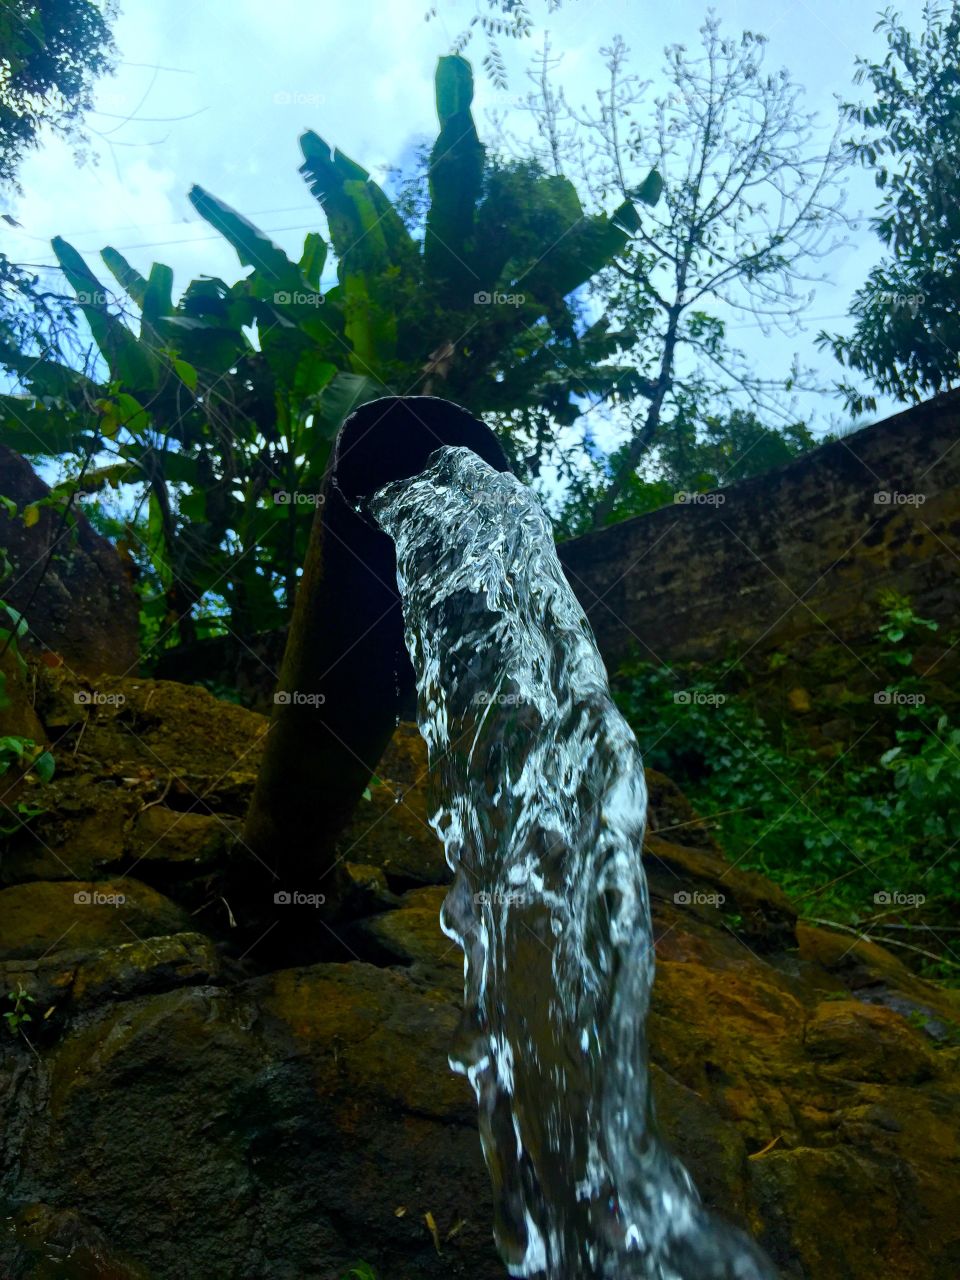 Superb excited this place This water cam from natural water fall ... This place met from Sri Lanka .. Near to idamgoda ...😔 but we can't see that water  fall we can see on like this pic ... This. I take at may be 2.30 or 2 .00pm ... I am ride my bike long trip  first time ... That water is amazing ... Bath and re-fresh ... Can test natural water .. 